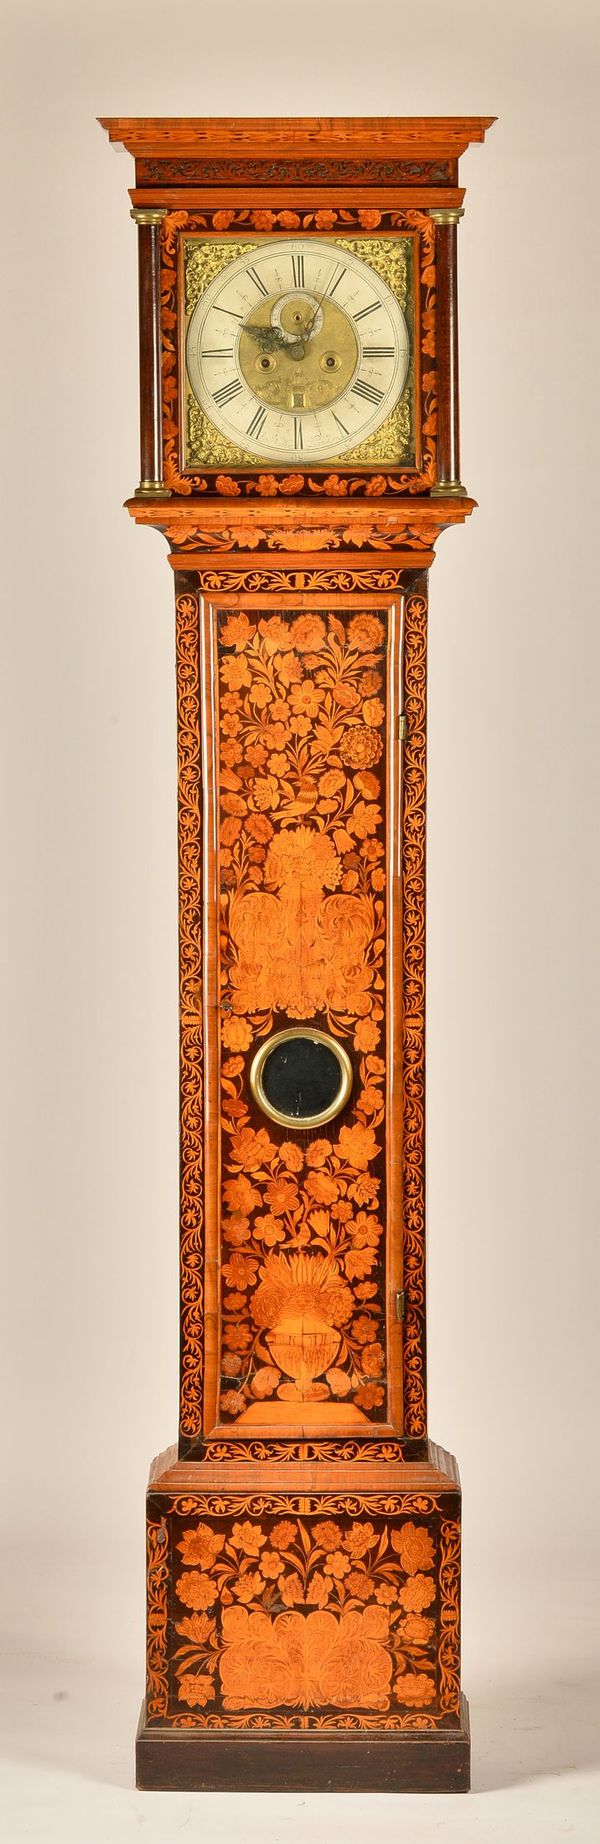 A WILLIAM II WALNUT AND FLORAL MARQUETRY STRIKING LONGCASE CLOCK